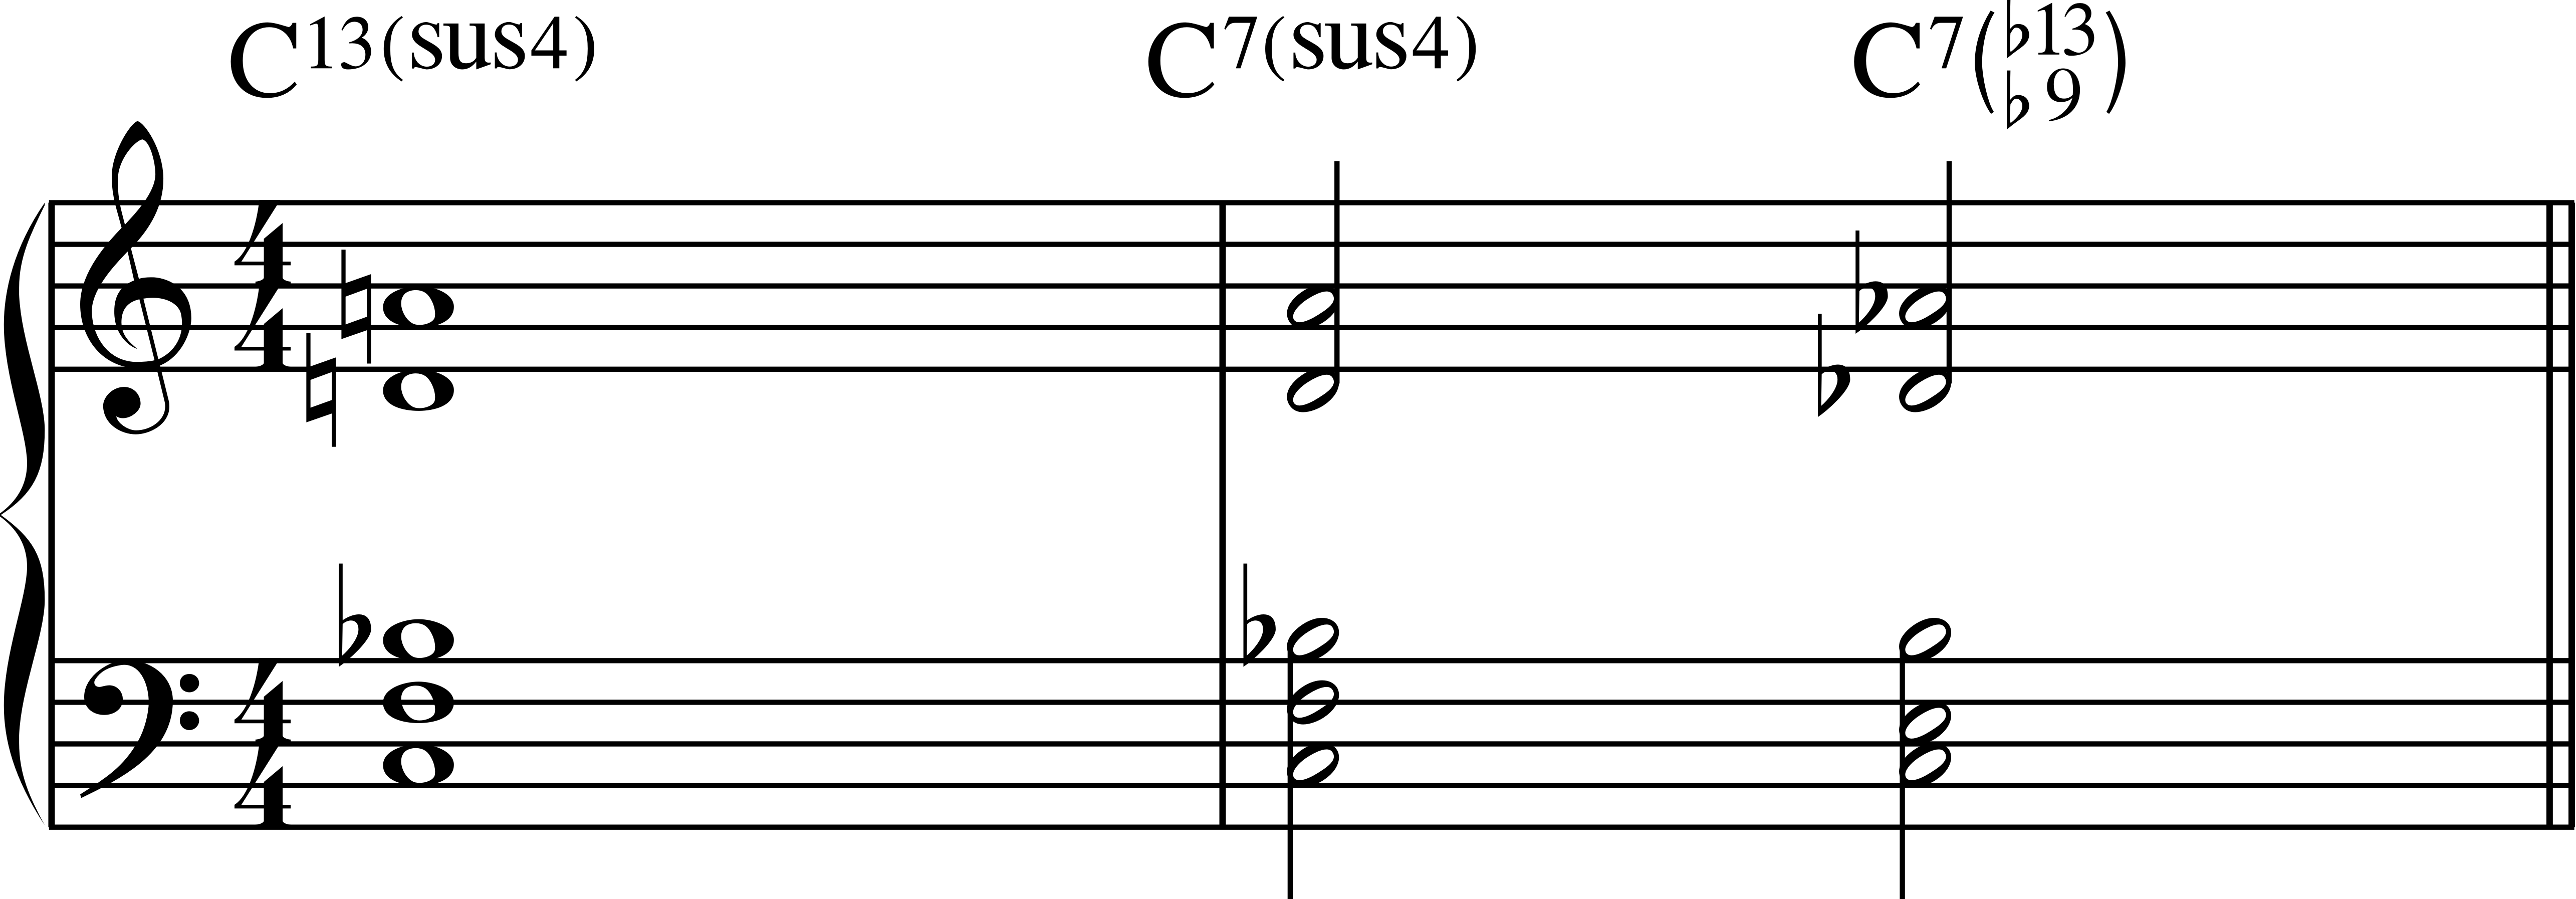 suspended chord resolution example 1